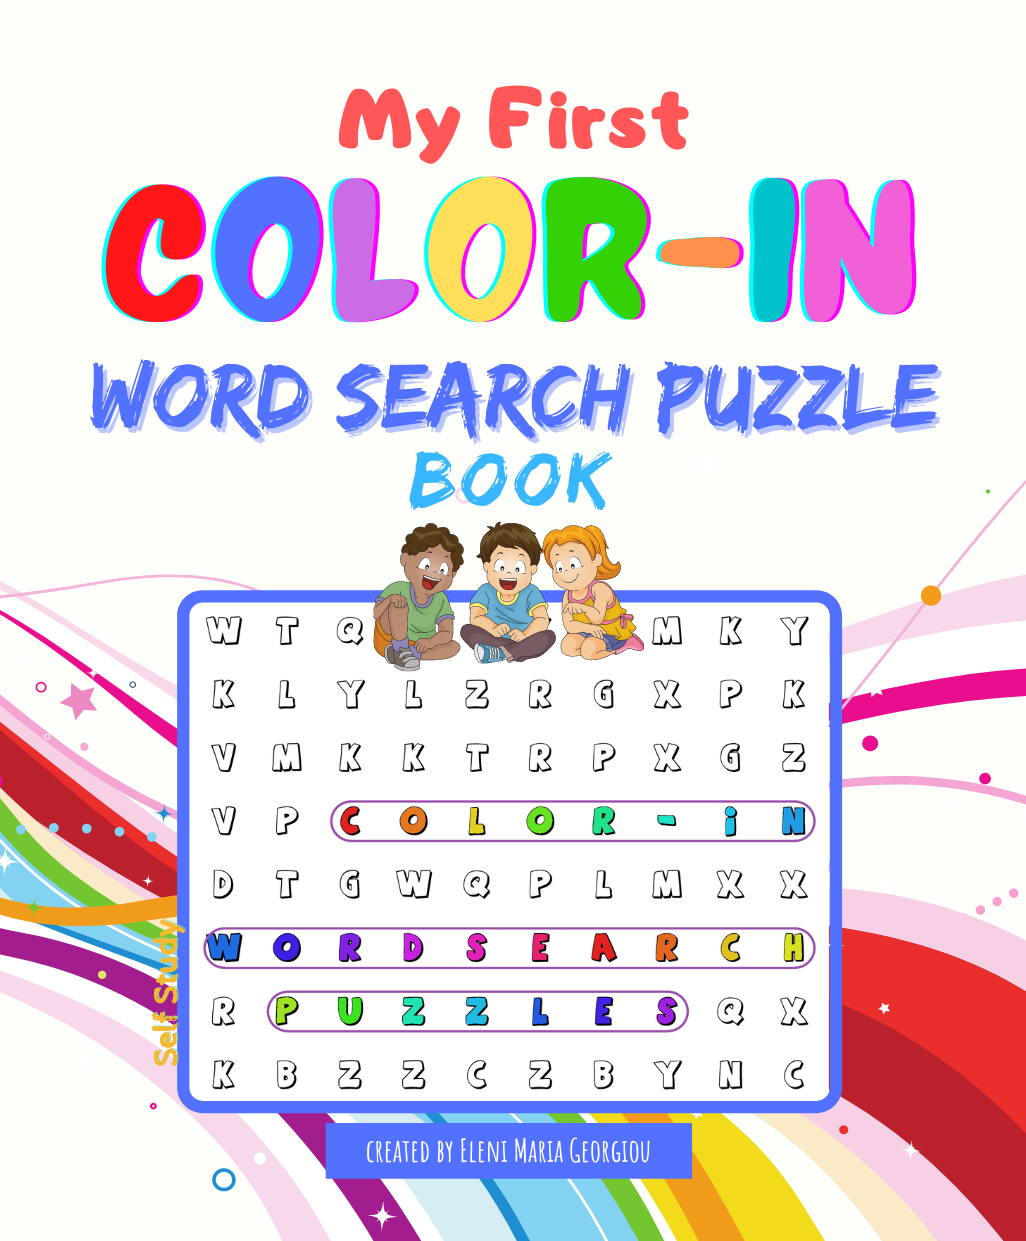 My First Color-In Word Search Puzzle Book